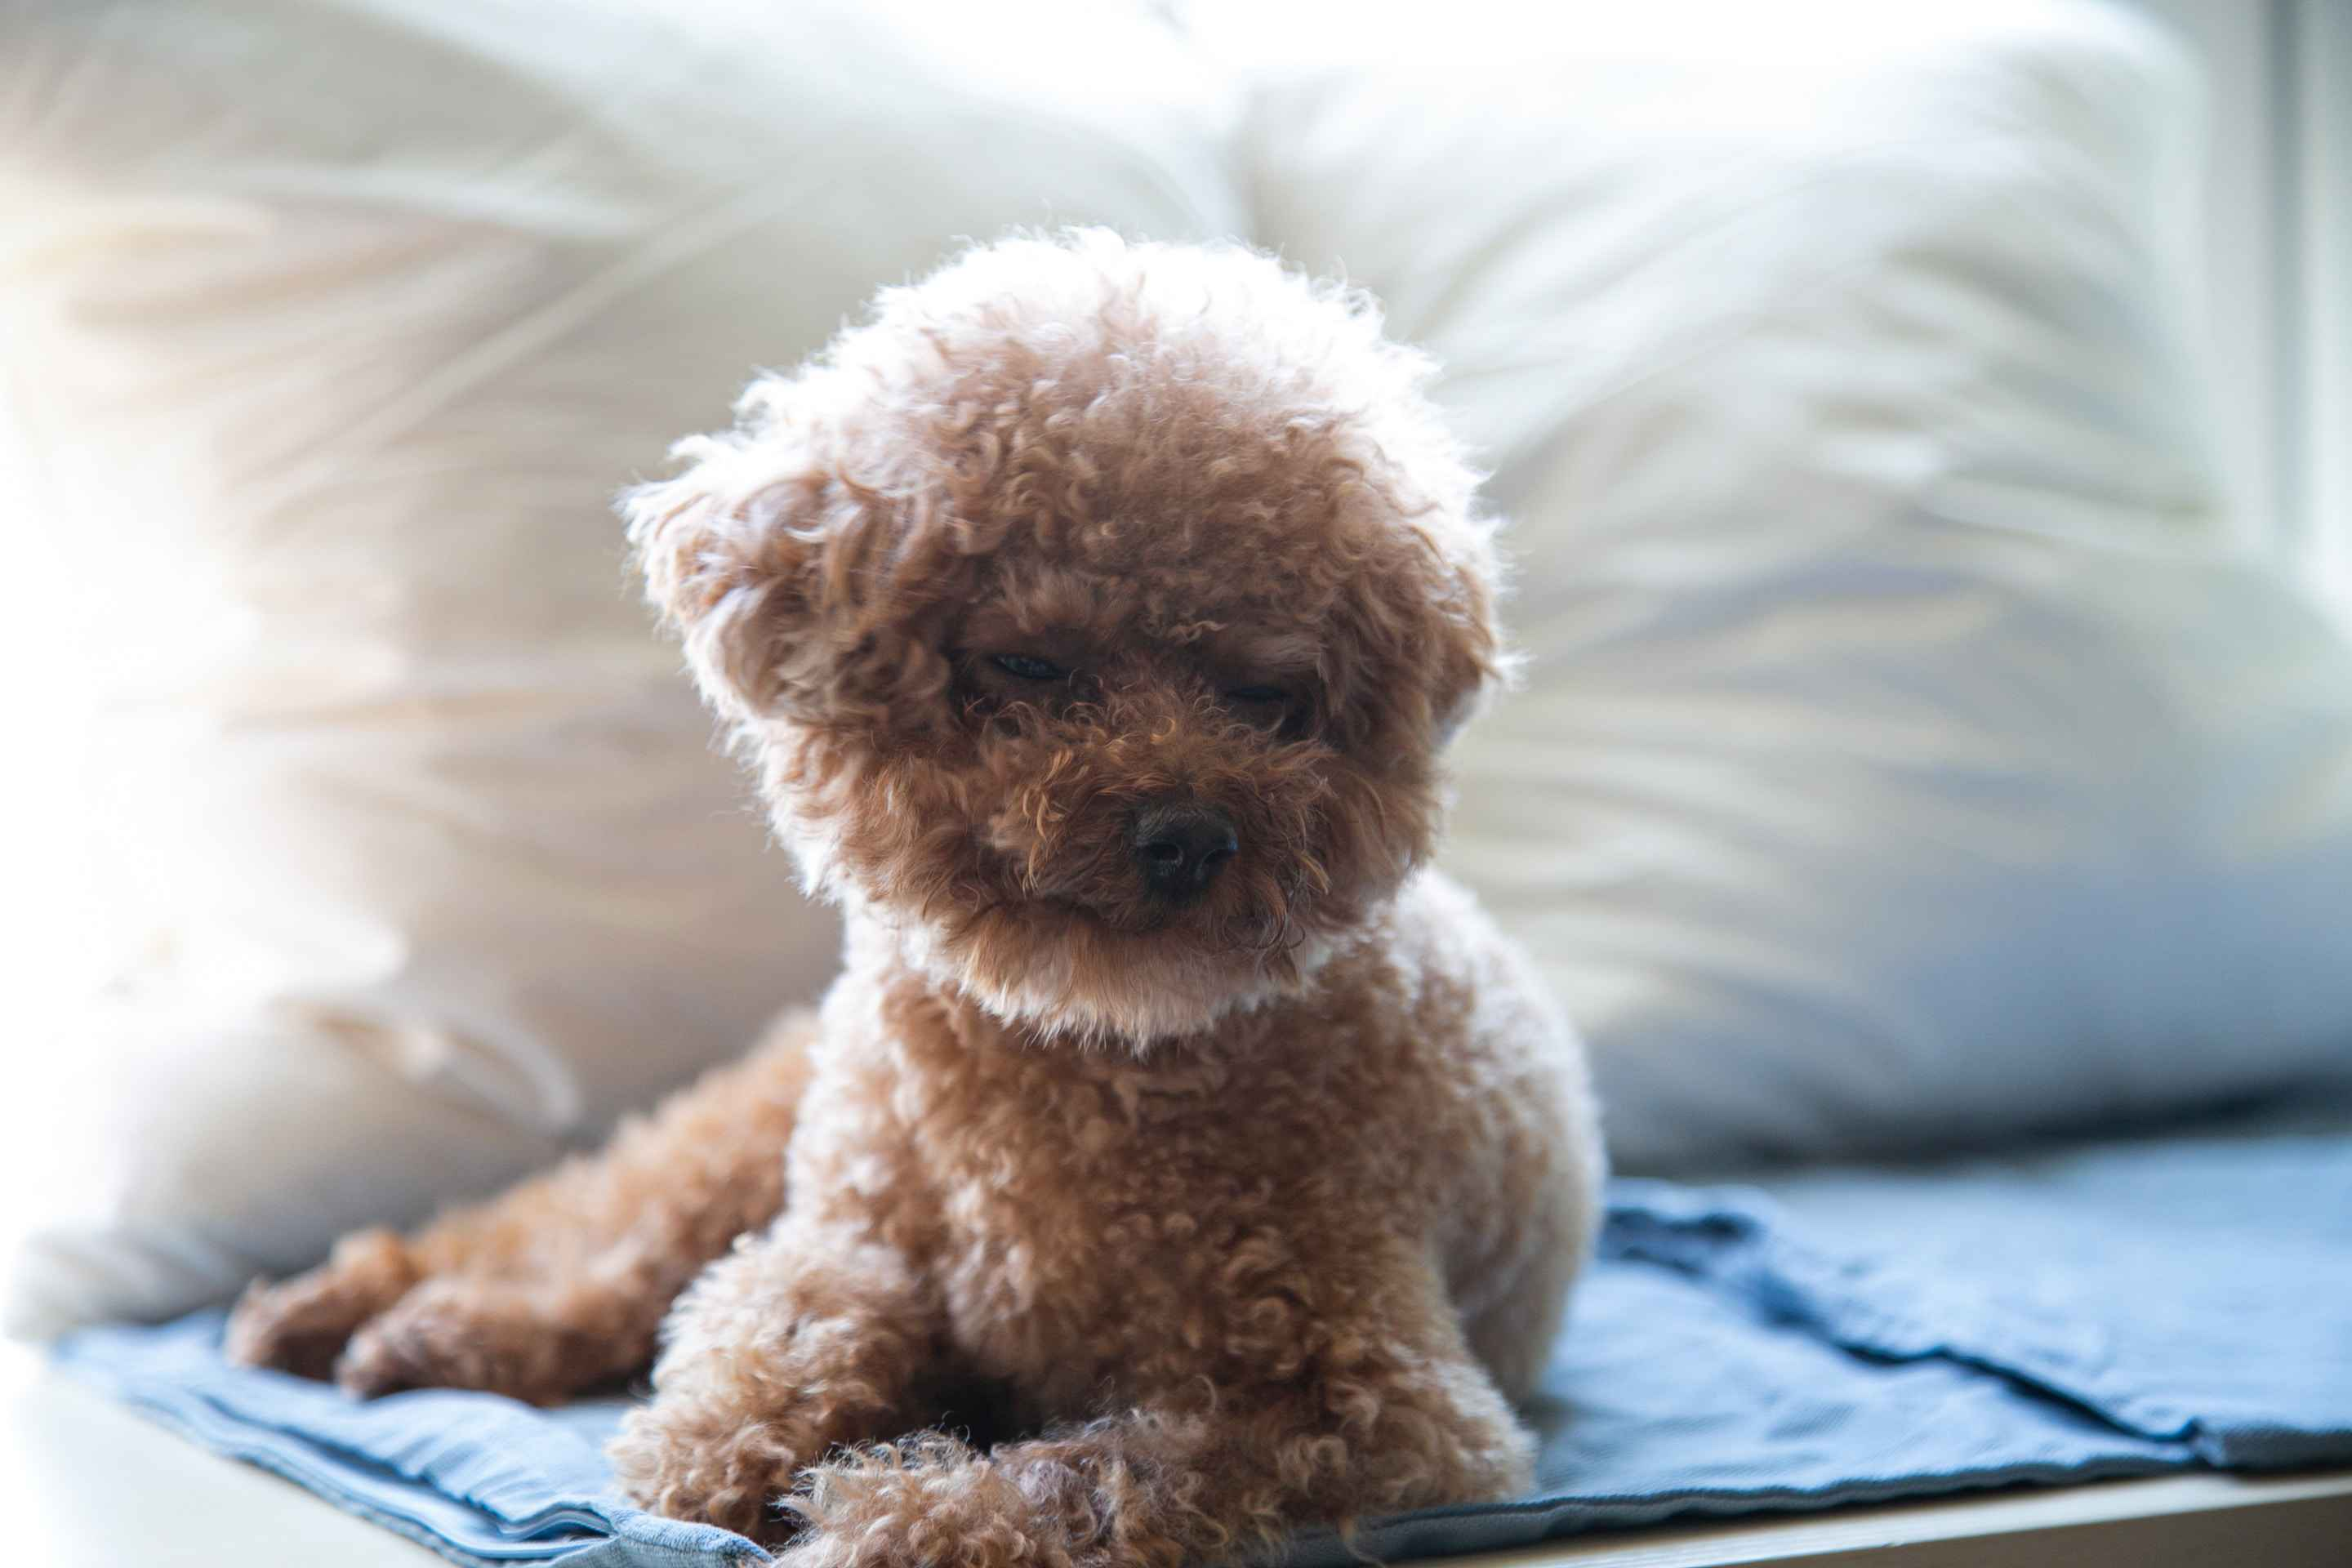 How can you create a safe and secure space for your Poodle puppy in your home?